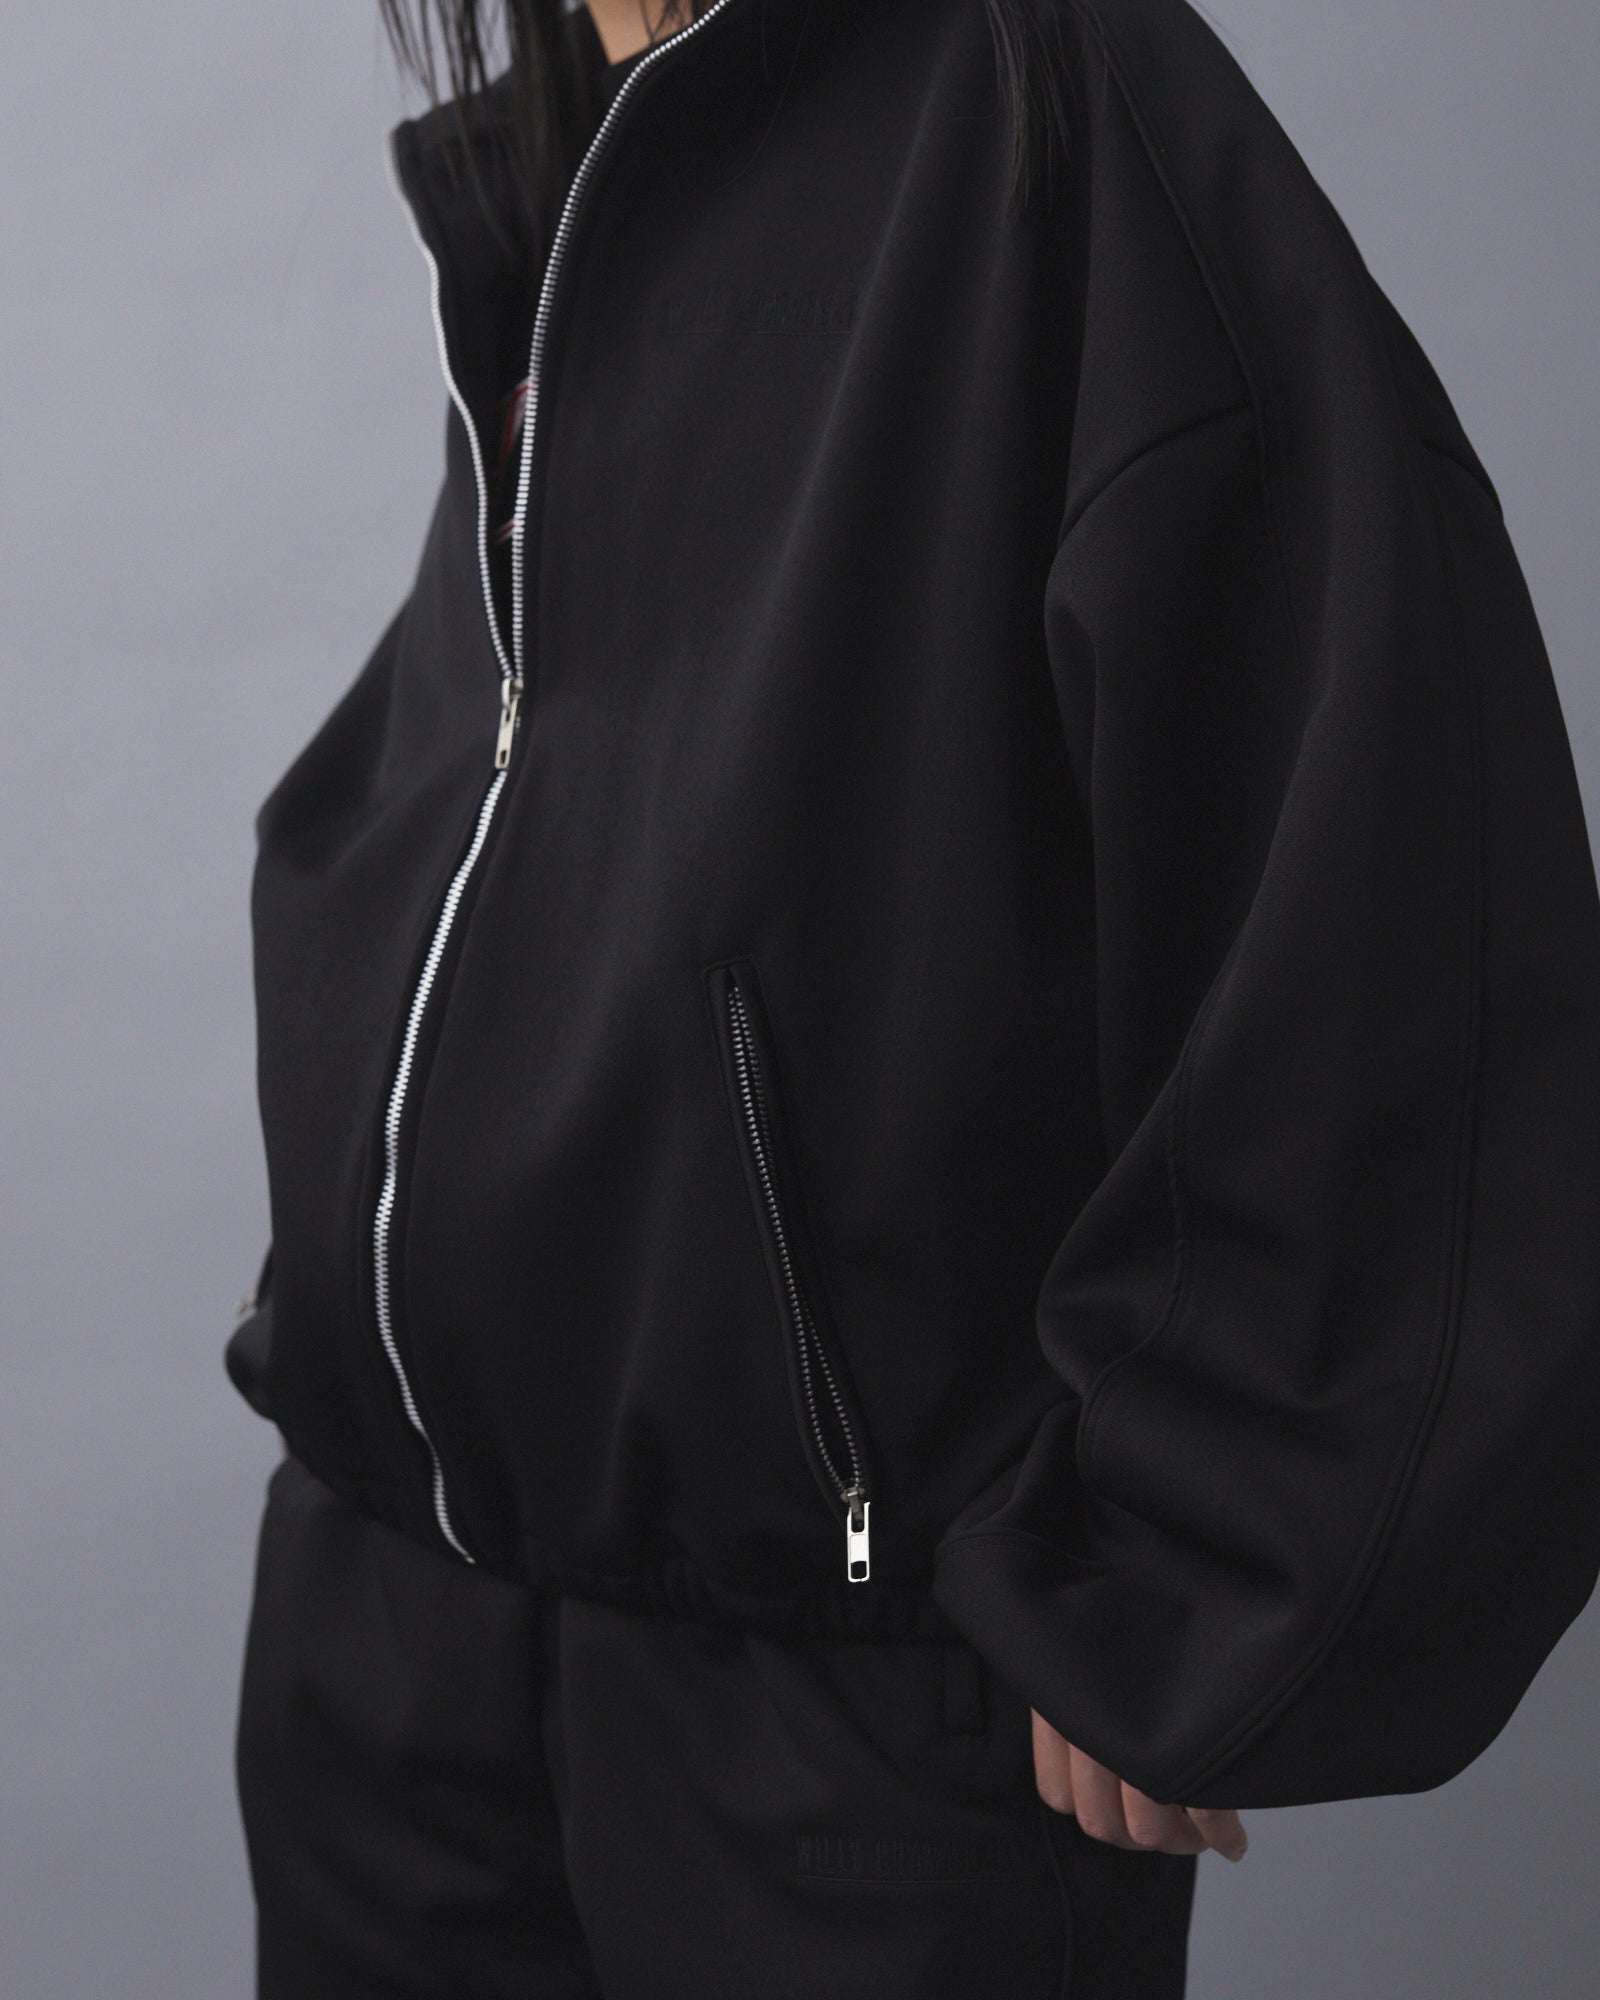 WILLY CHAVARRIA / WARRIOR BOMBER TRACK JACKET 24SS WILLY BLACK